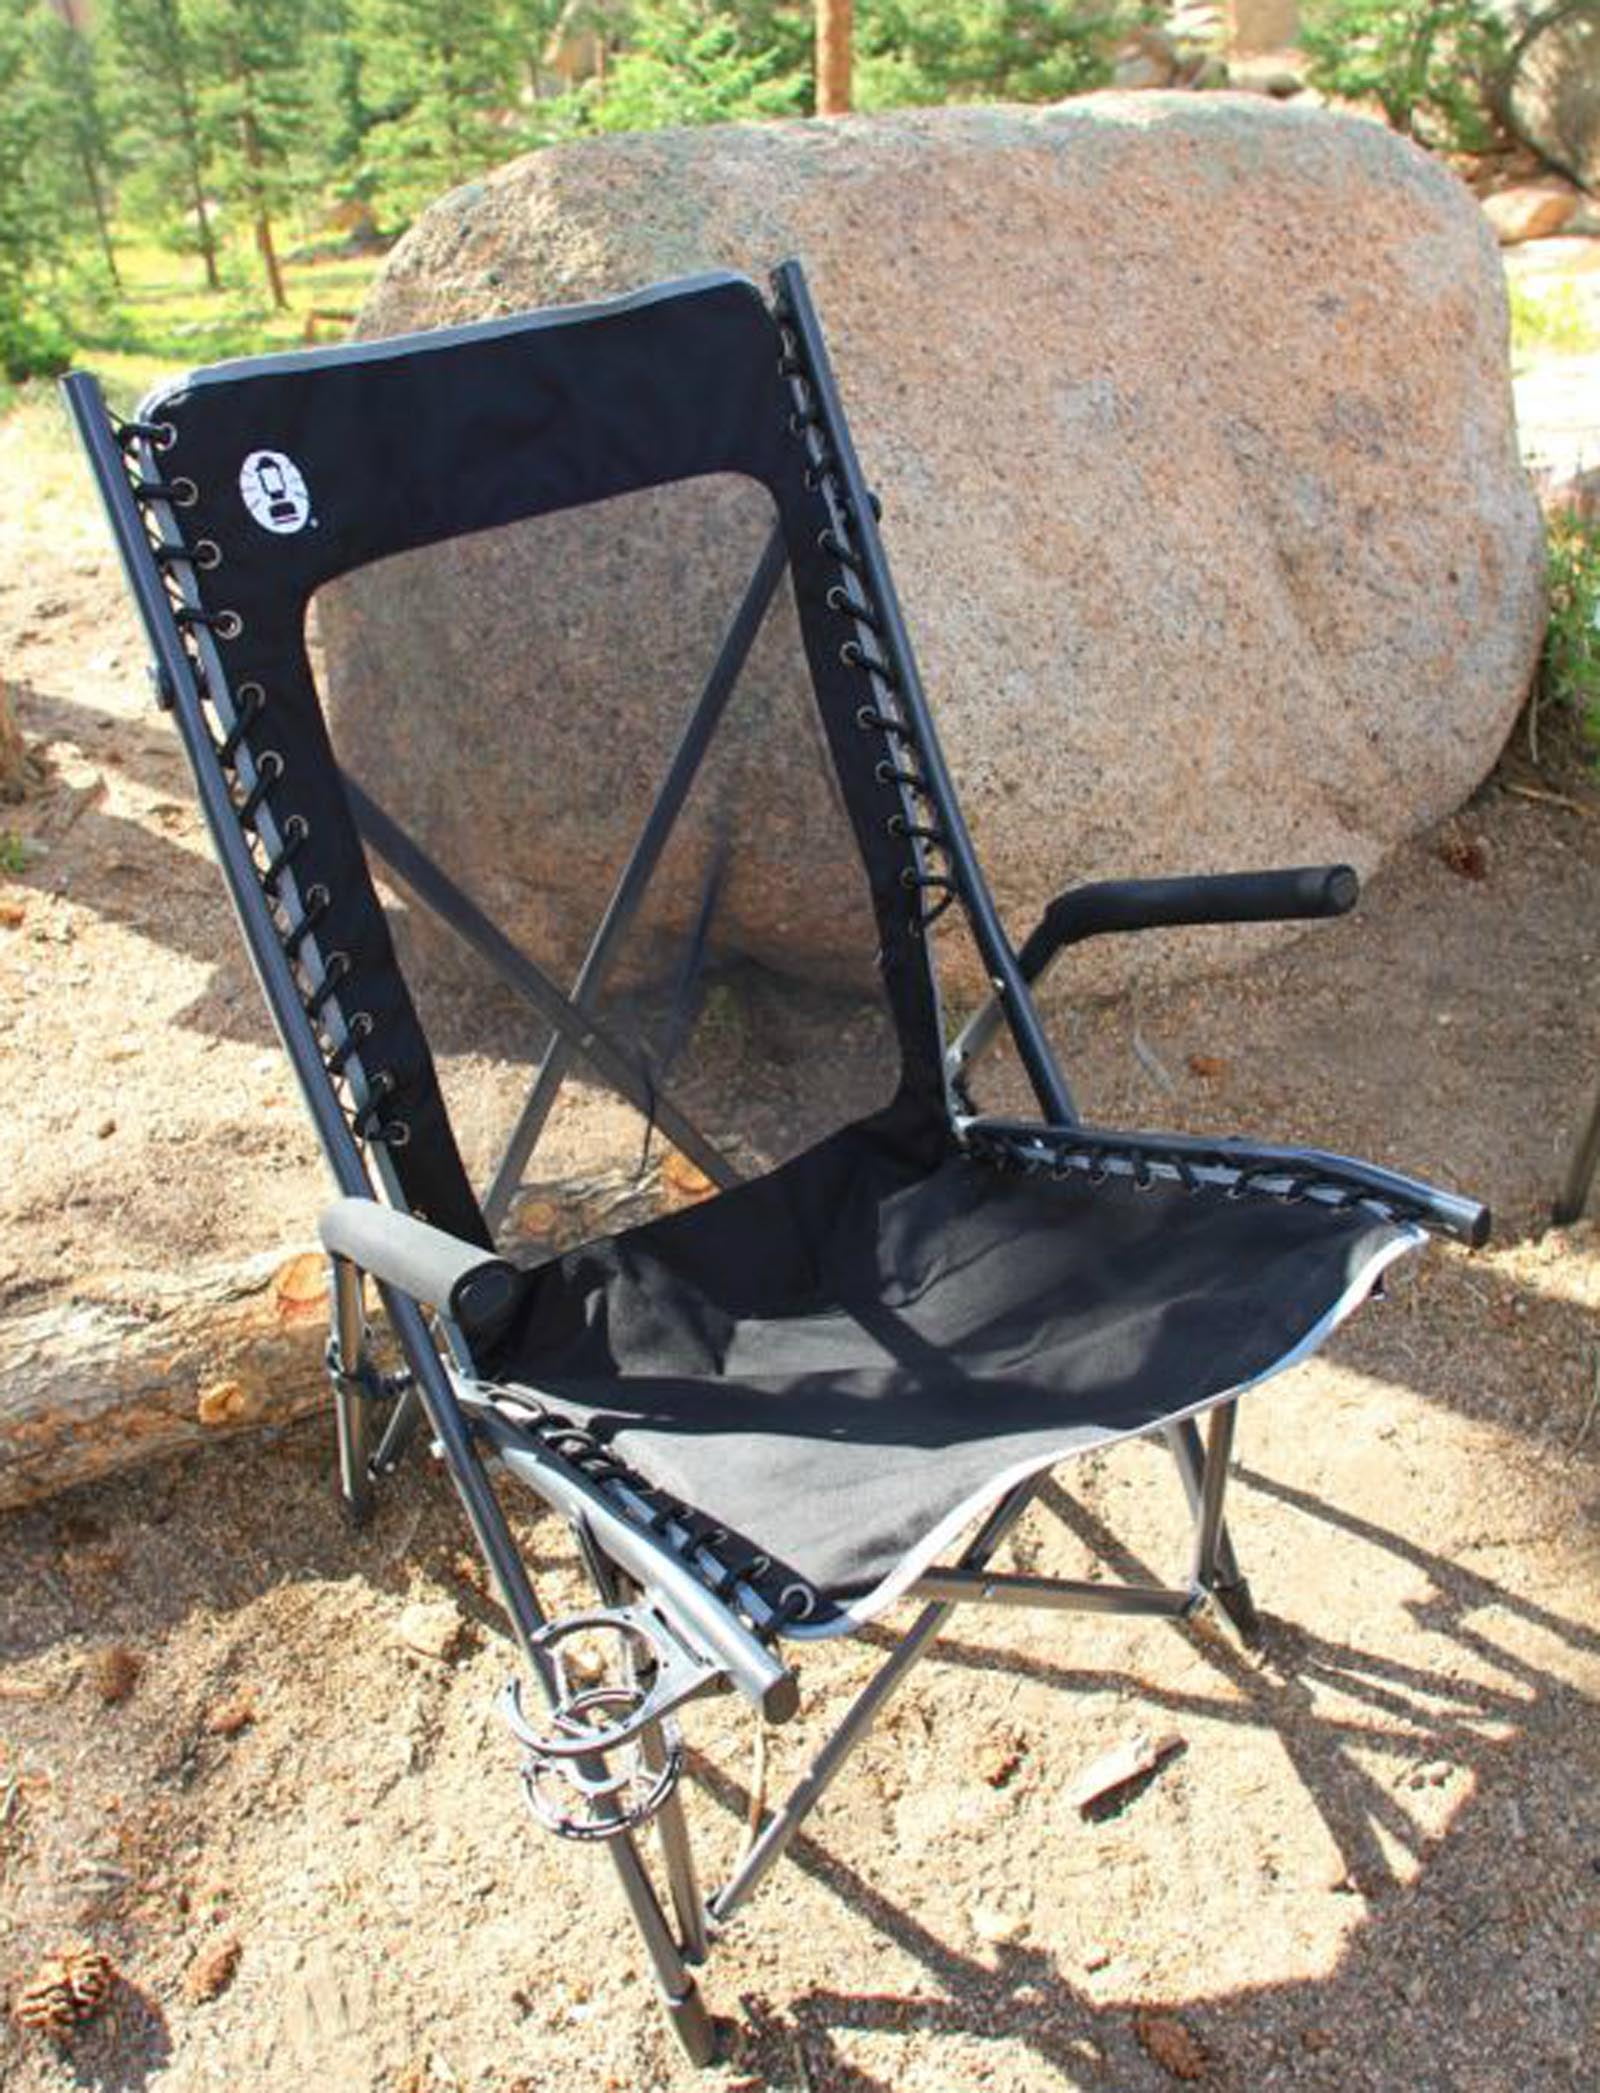 (2) COLEMAN ComfortSmart Suspension Camping Folding Chairs w/ Mesh Back